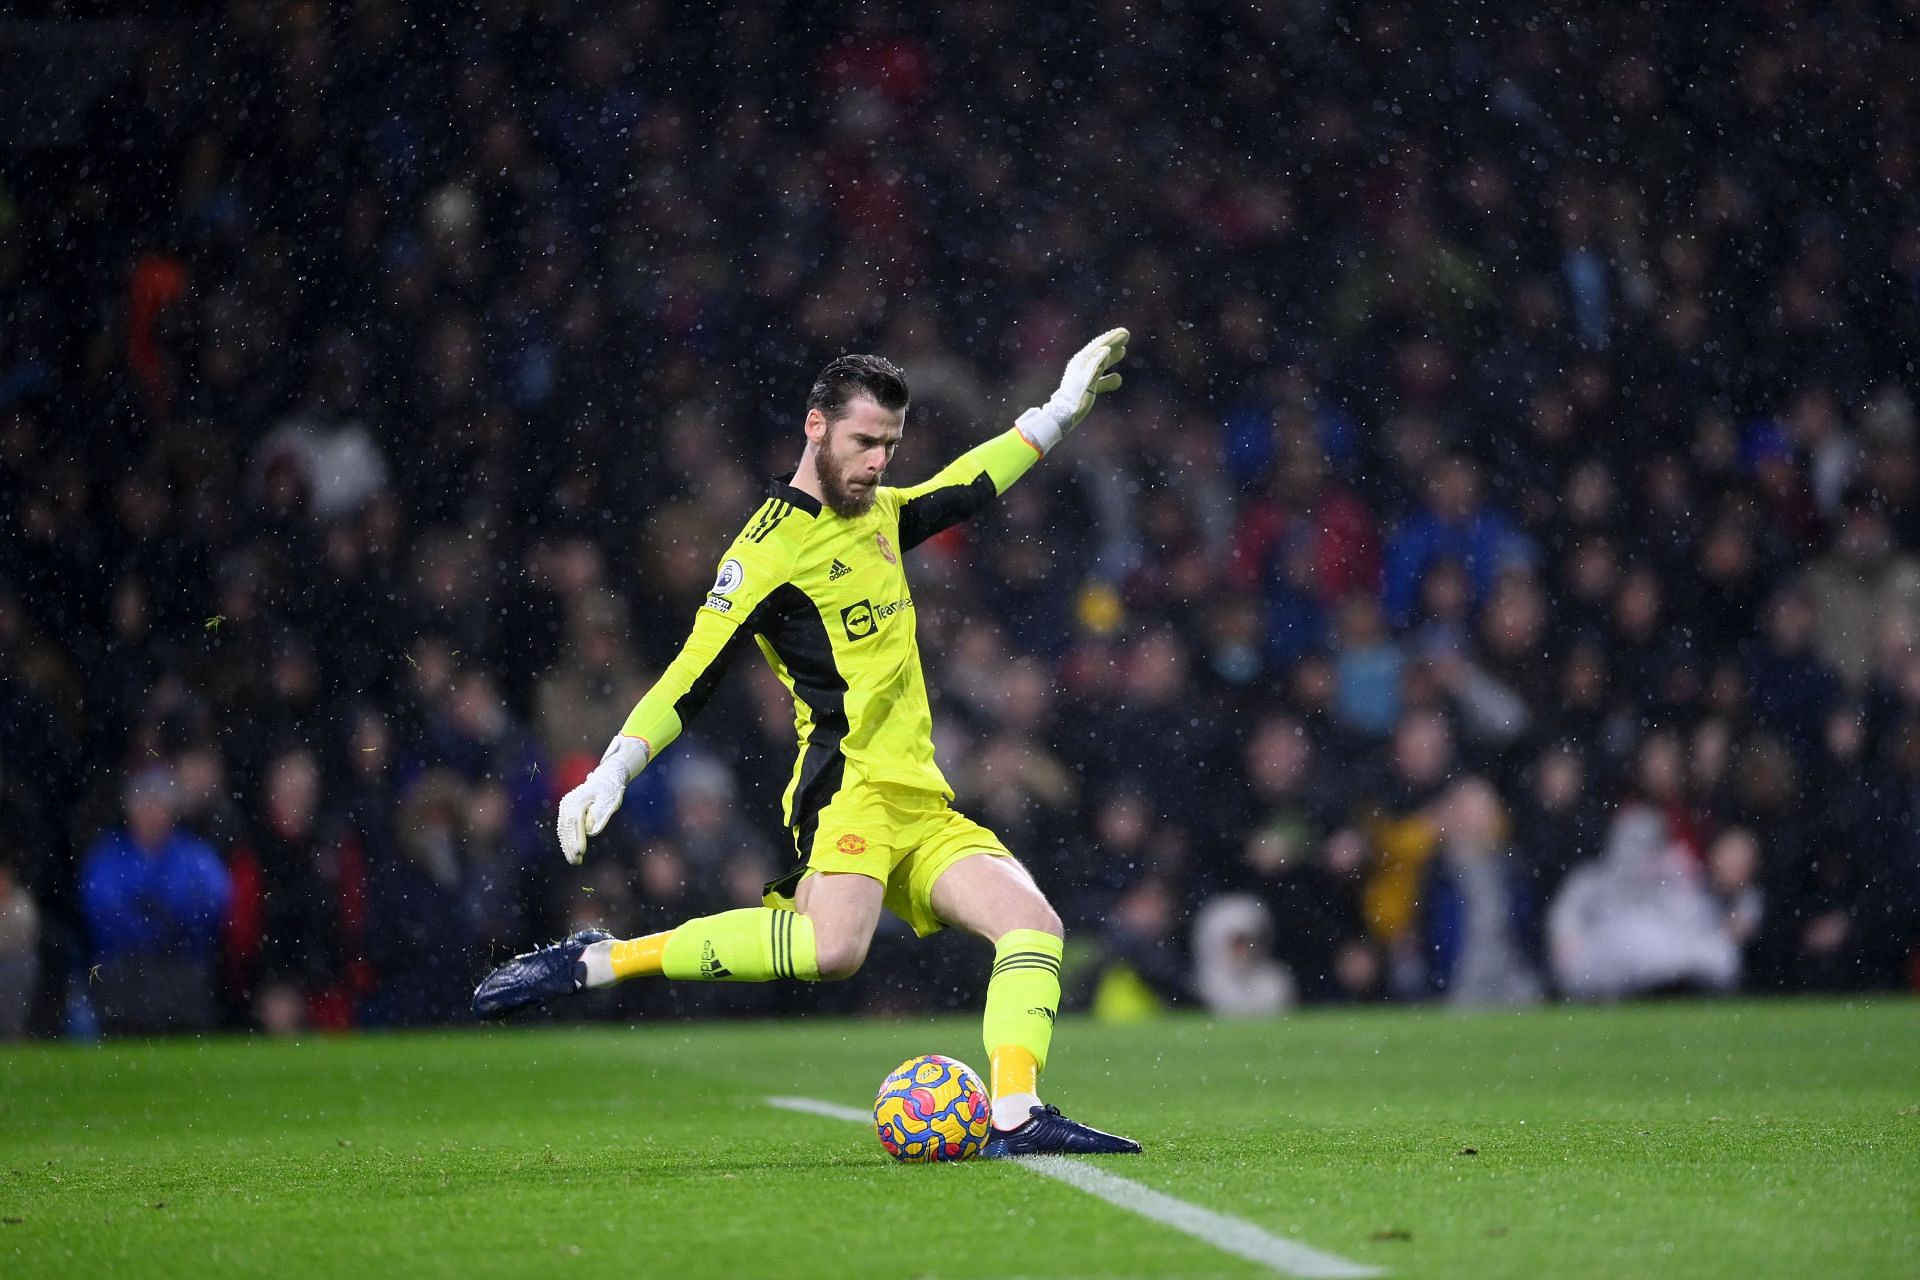 De Gea in action for the Red Devils